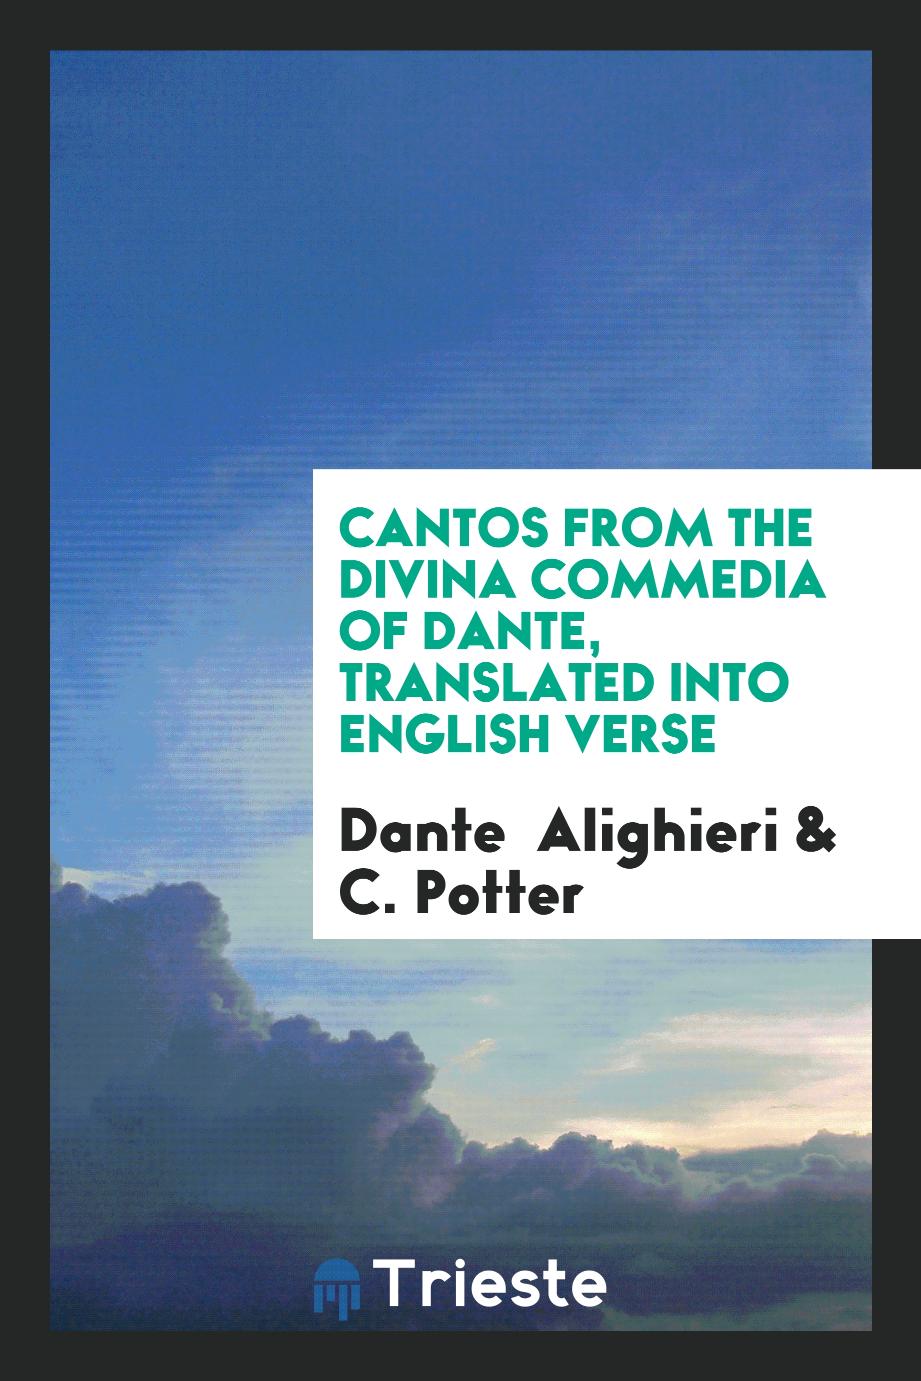 Cantos from the Divina Commedia of Dante, Translated into English Verse